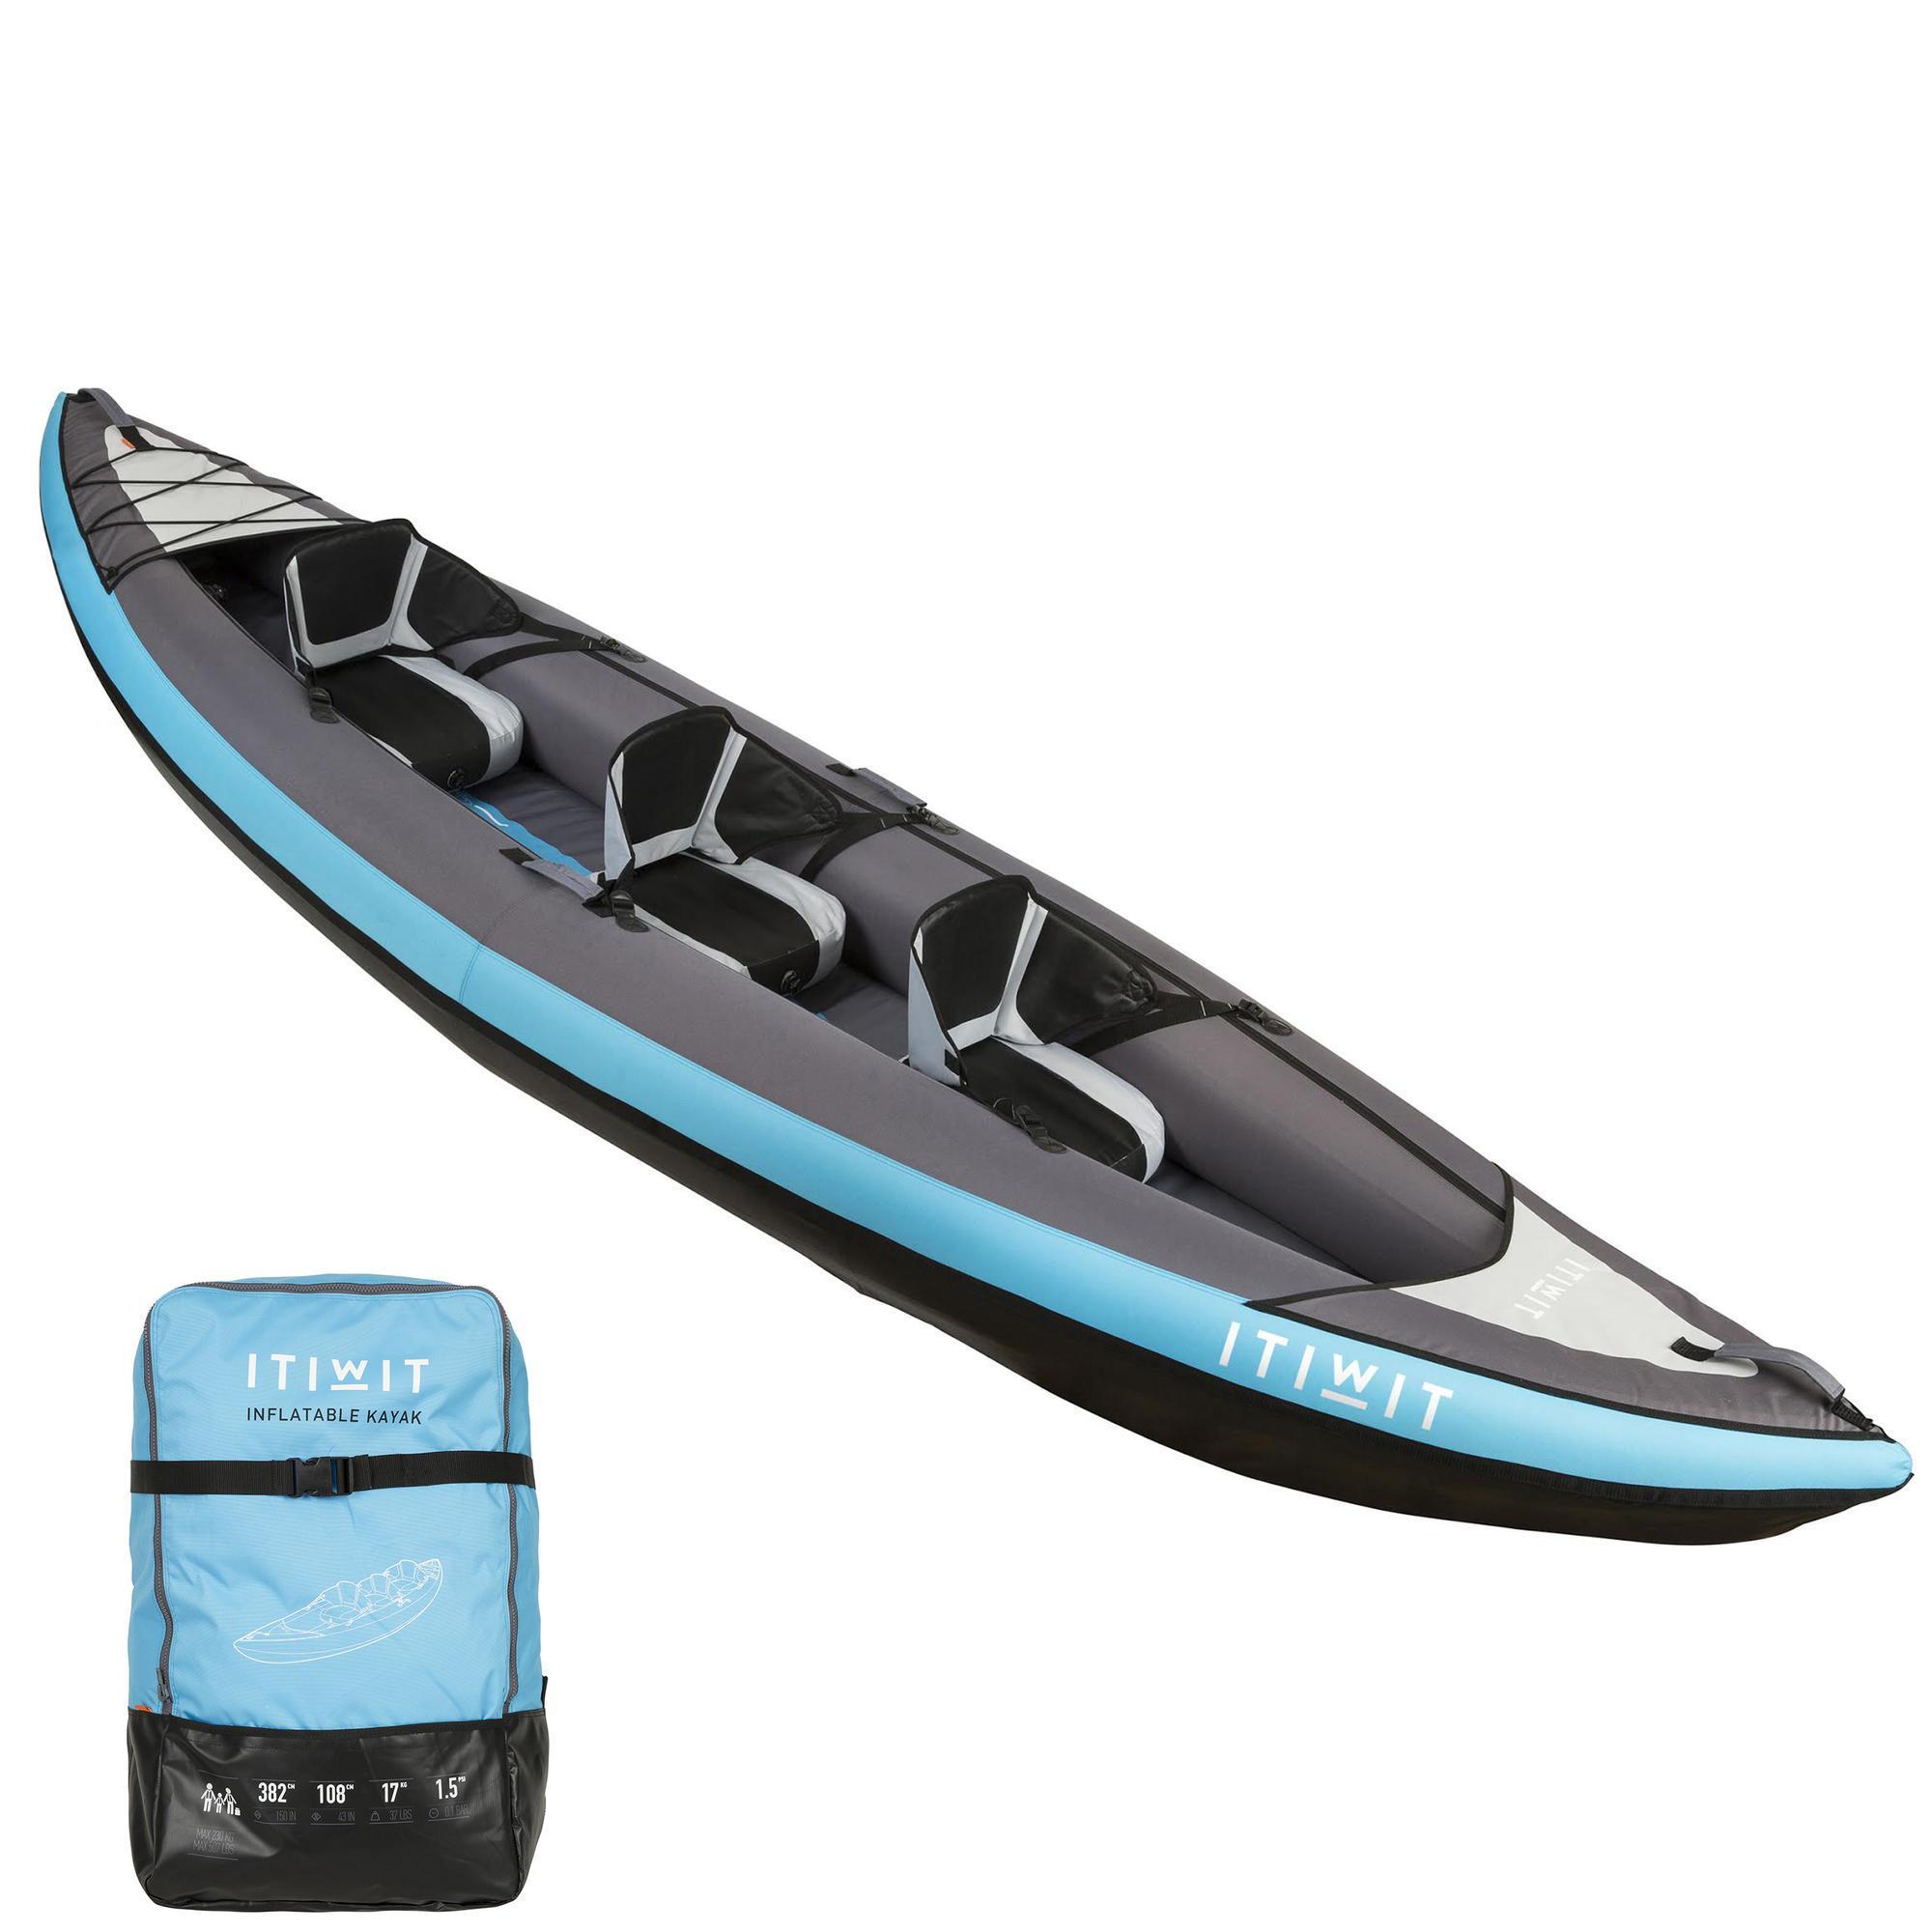 V5 Inflatable Floor For Itiwit 3 New Kayak